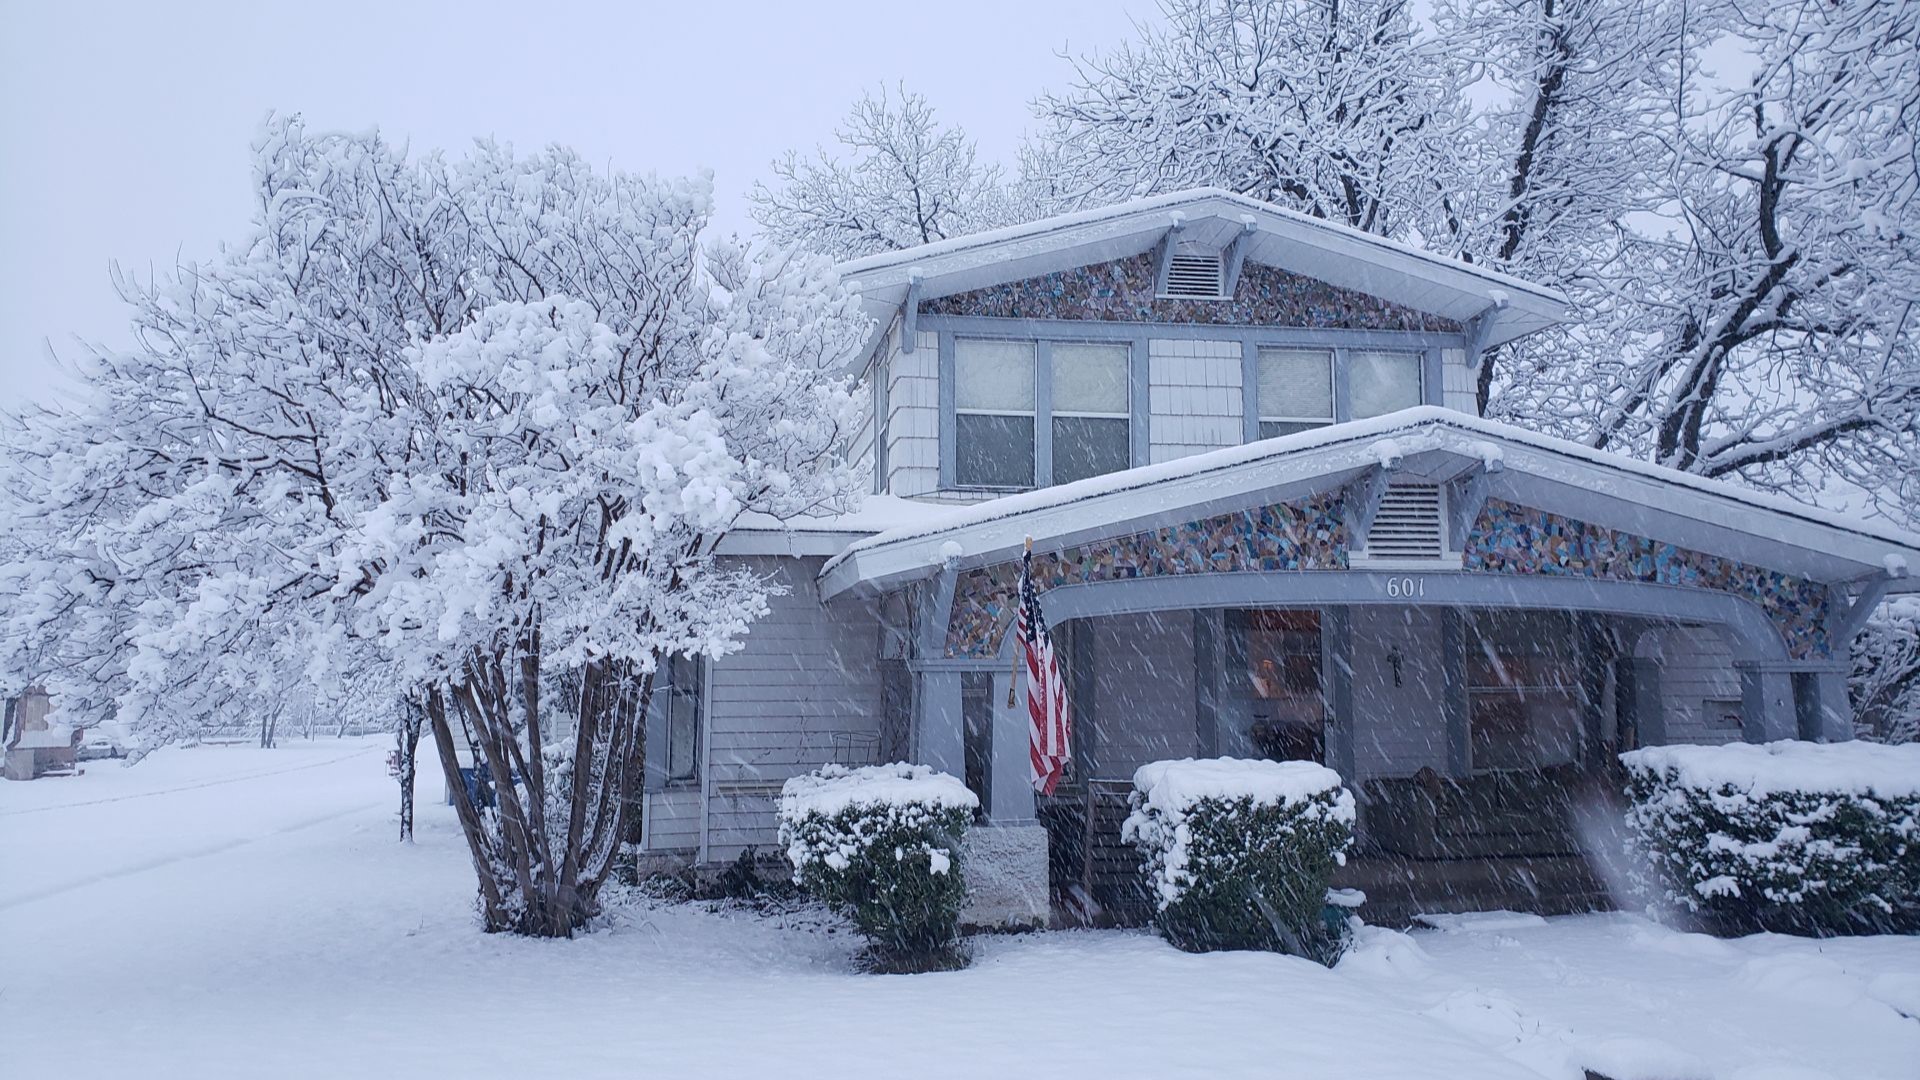 Texas snow photos and video Scenes from winter weather